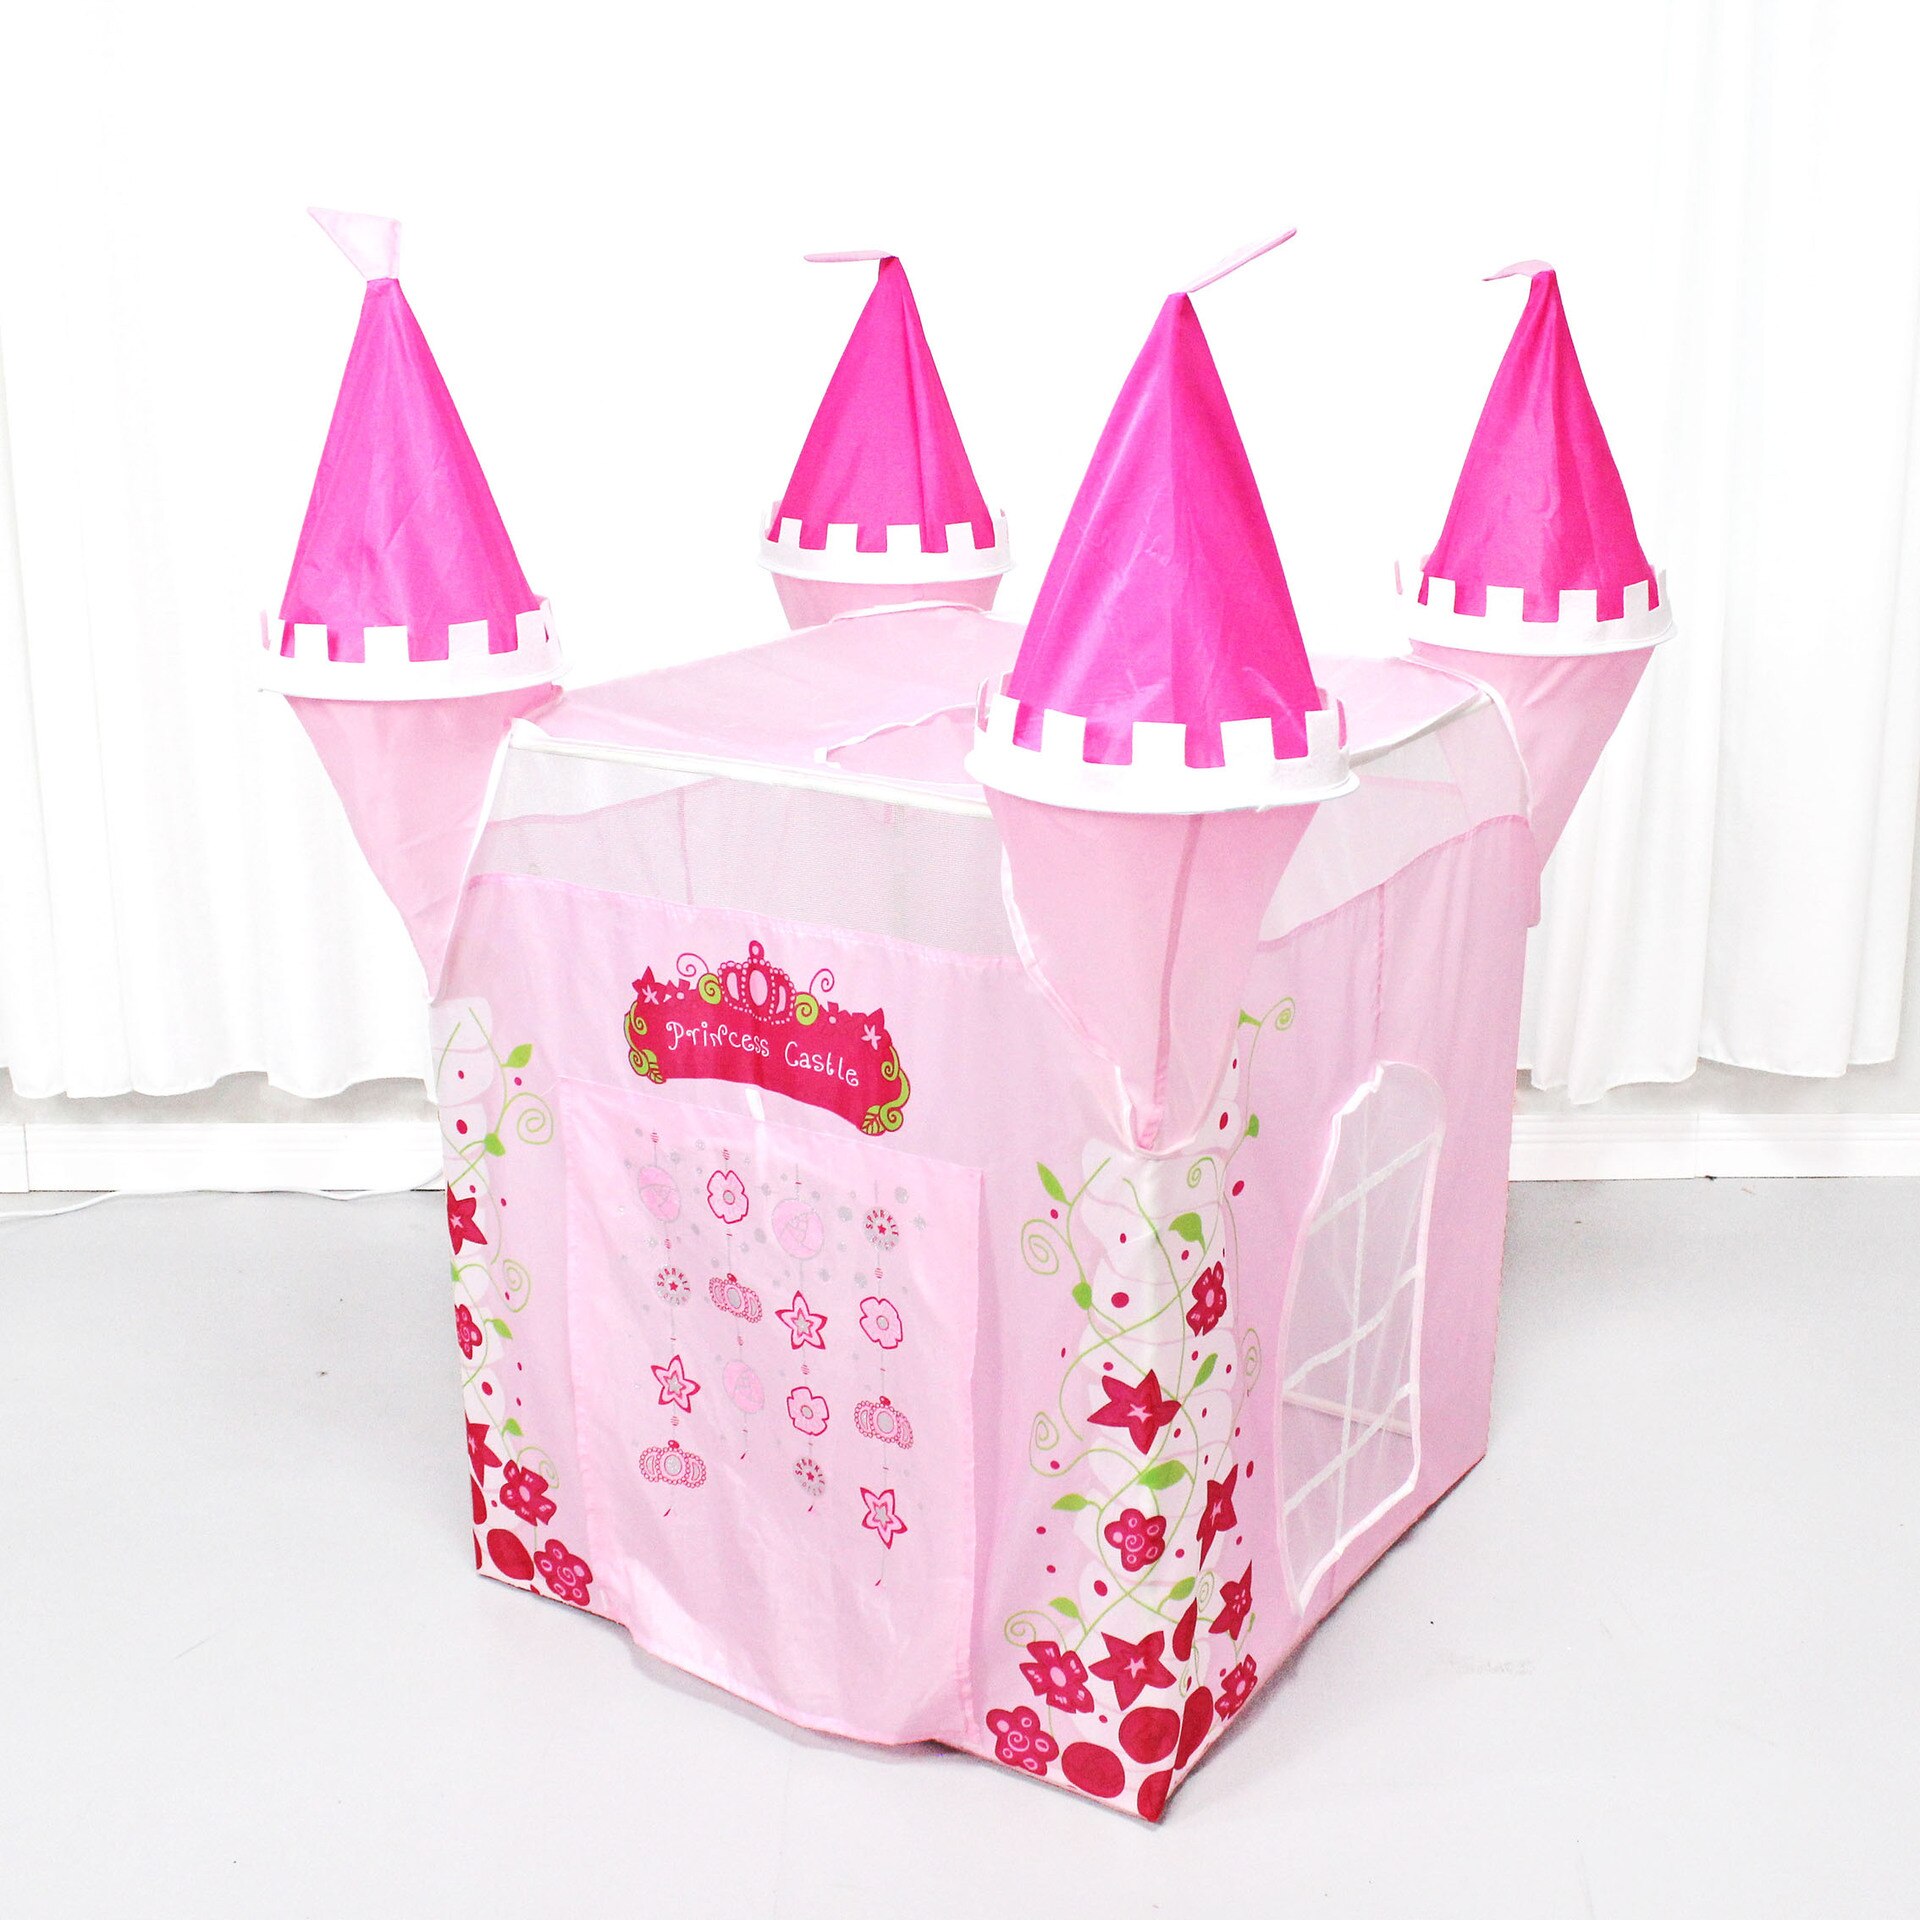 New-Child-Toys-Tents-Princess-Castle-Play-Tent-Girl-Princess-Play-House-Indoor-Outdoor-Kids-Housees-3